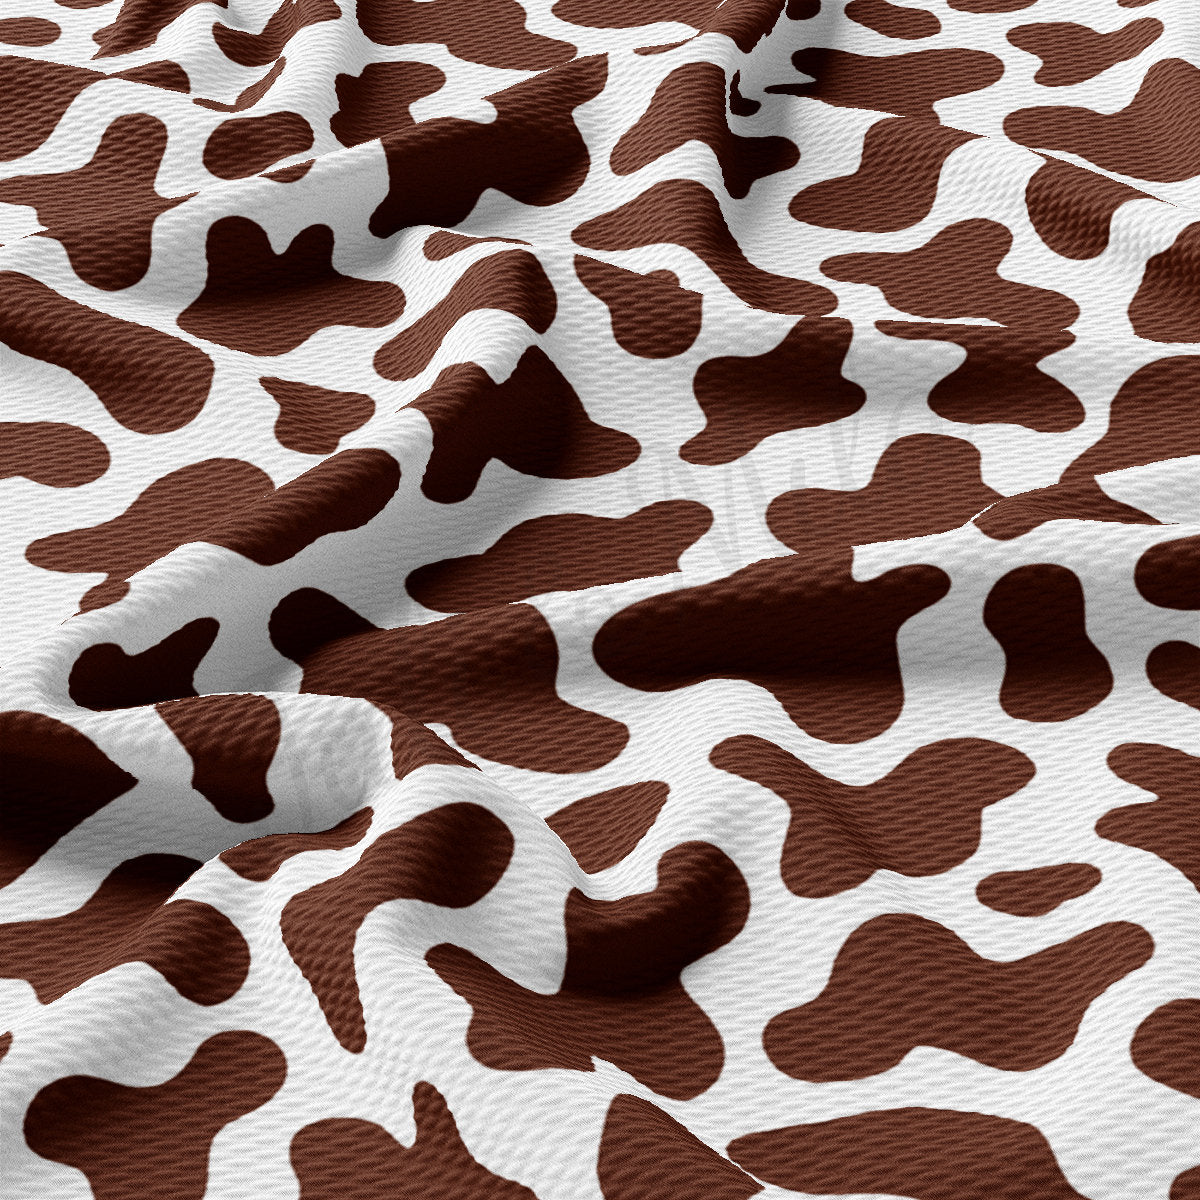 Brown Cow Spot Printed Liverpool Bullet Textured Fabric by the yard 4Way Stretch Solid Strip Thick Knit Liverpool Fabric AA2171